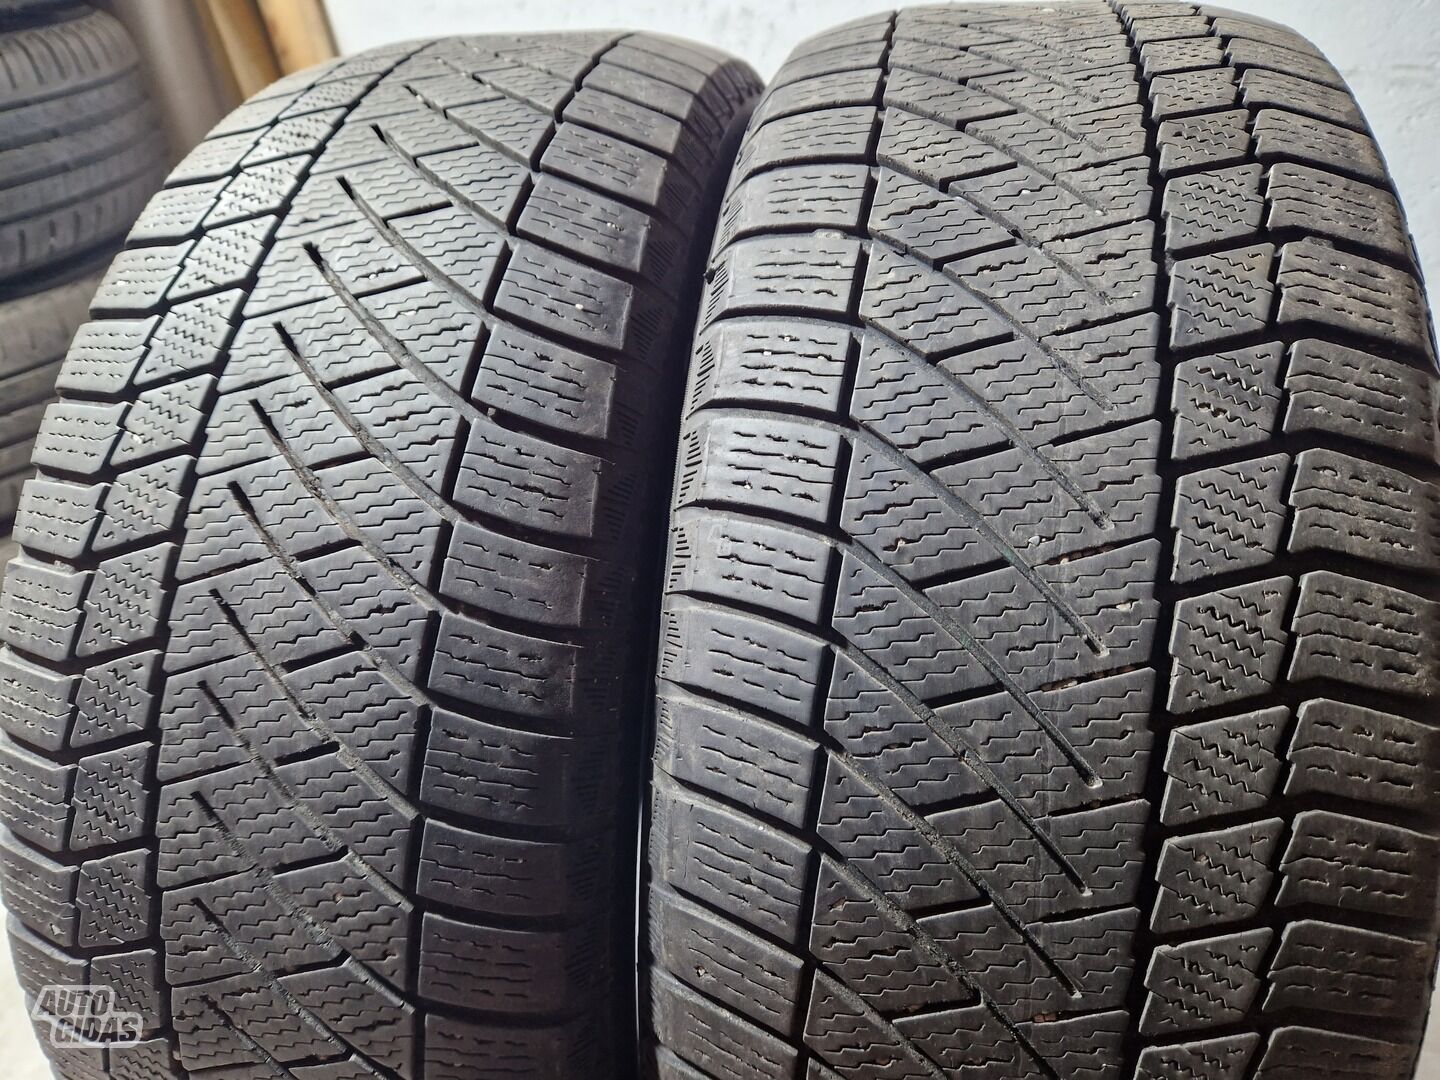 Continental 5-6mm R17 winter tyres passanger car